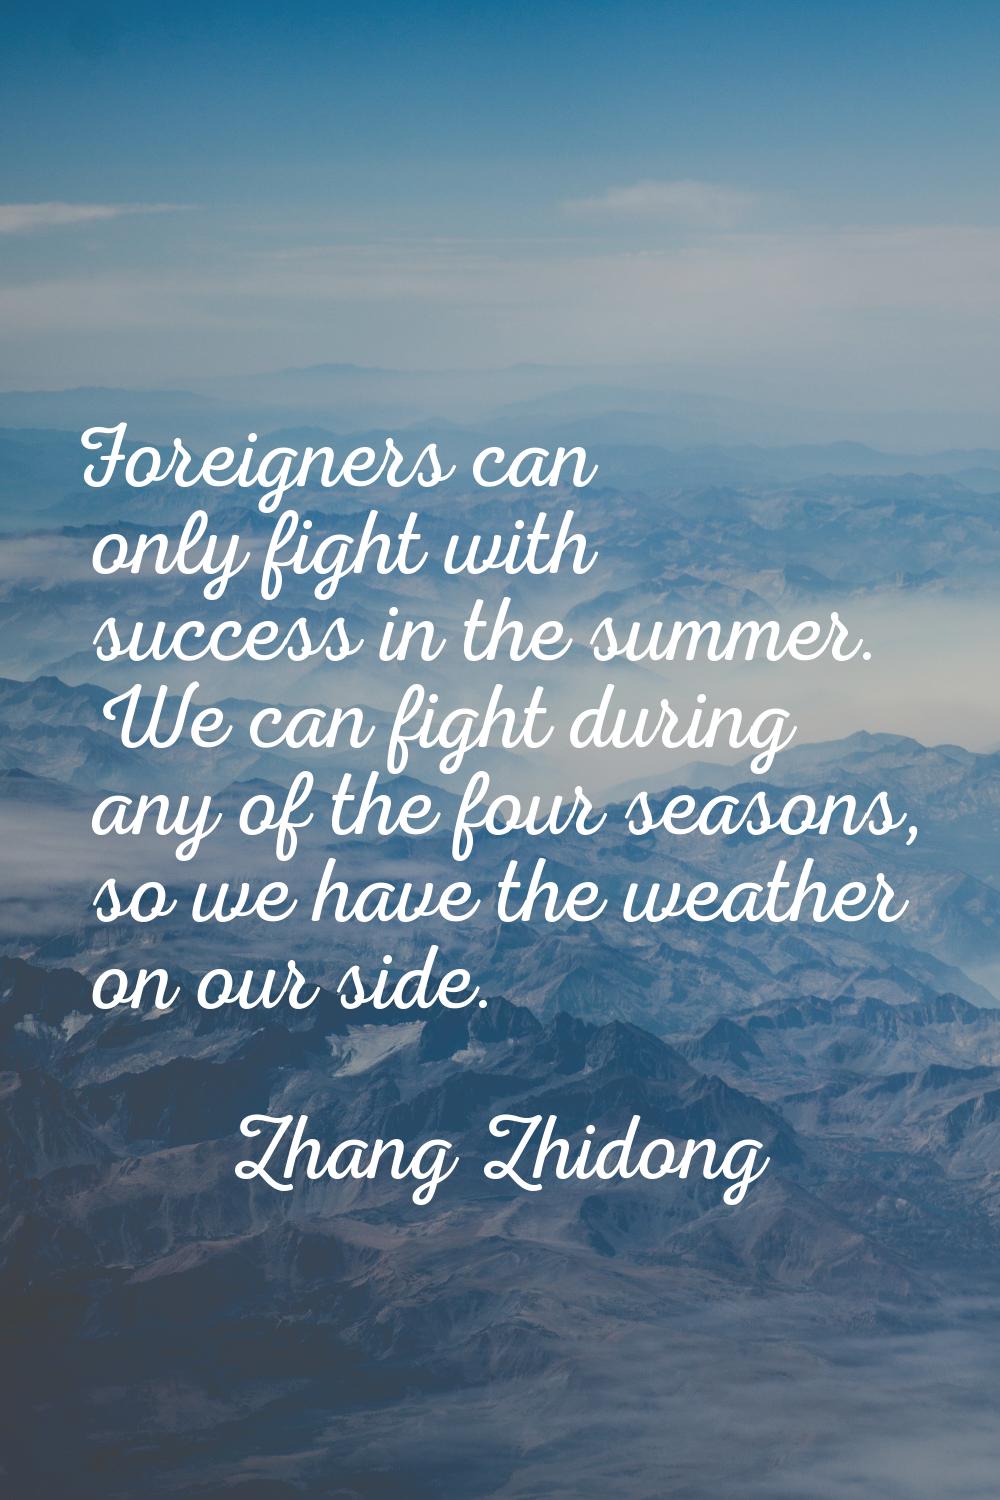 Foreigners can only fight with success in the summer. We can fight during any of the four seasons, 